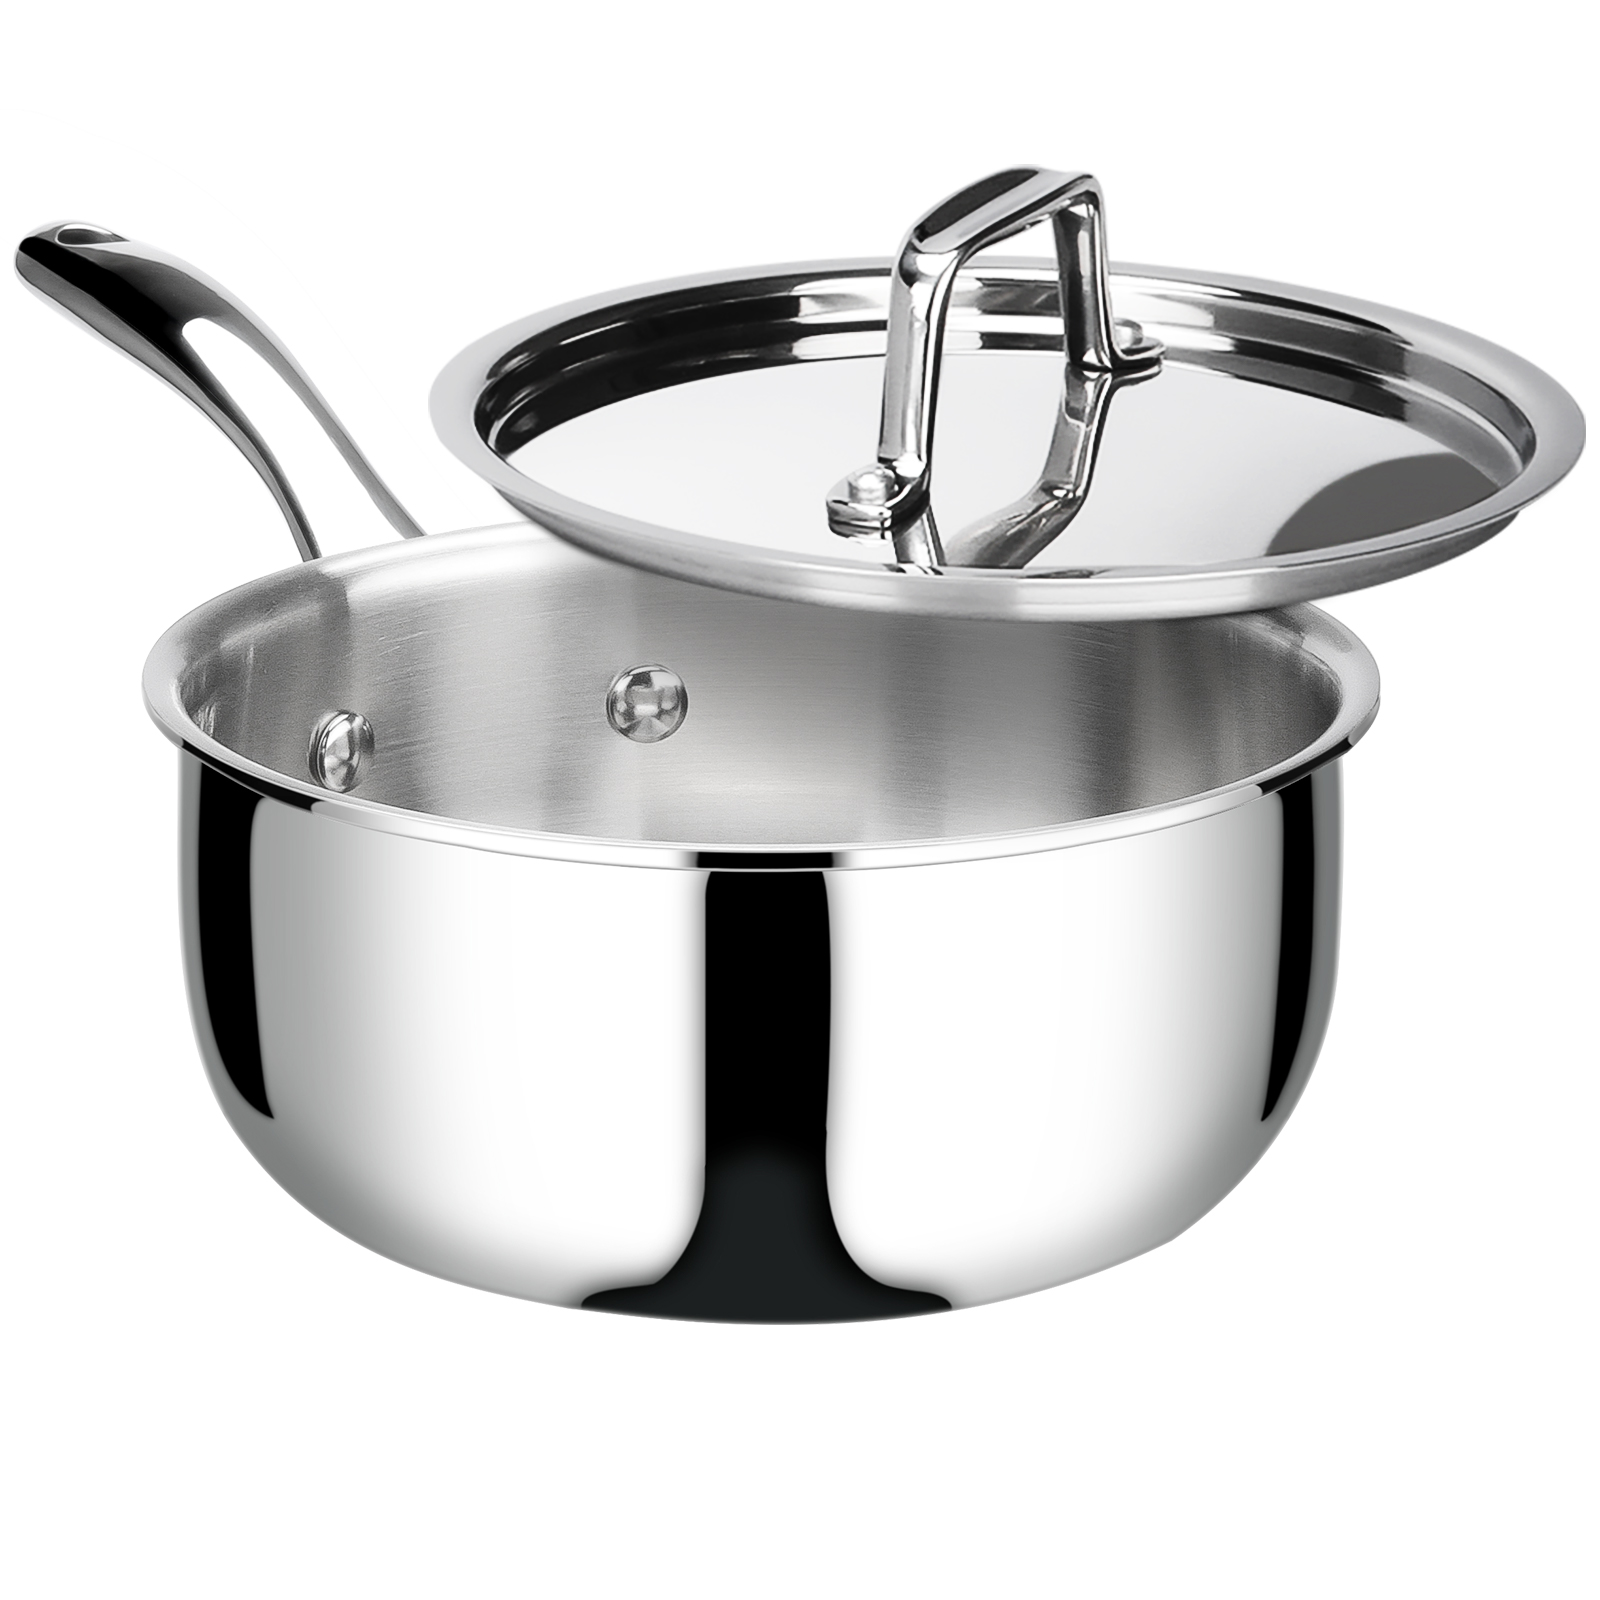 Duxtop 3 Qt Saucepan with Lid, Whole-Clad Tri-Ply Stainless Steel